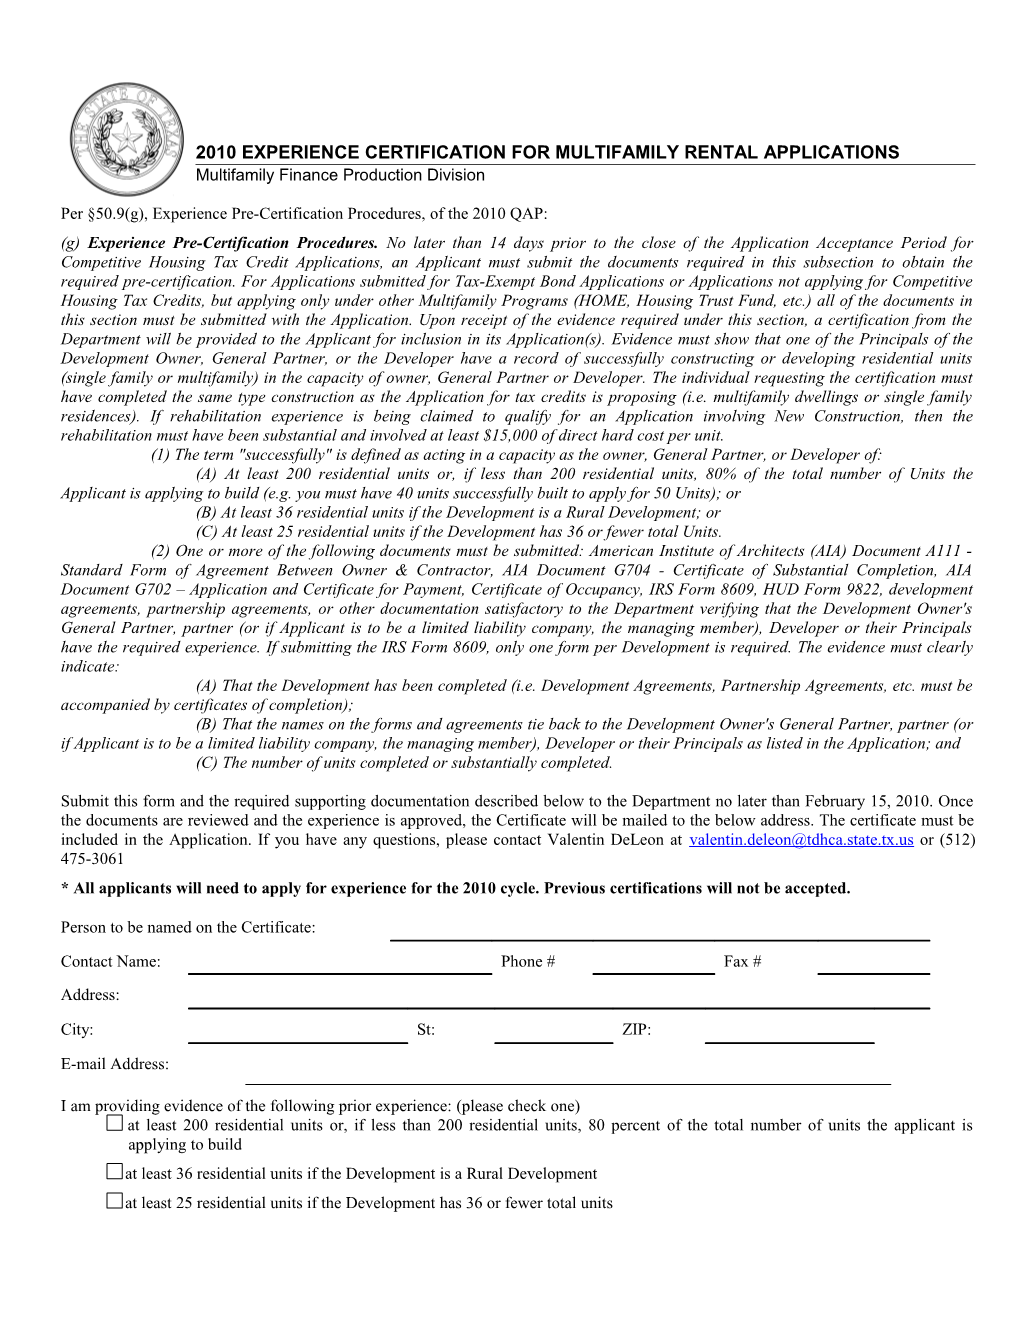 2010 Experience Certification Form